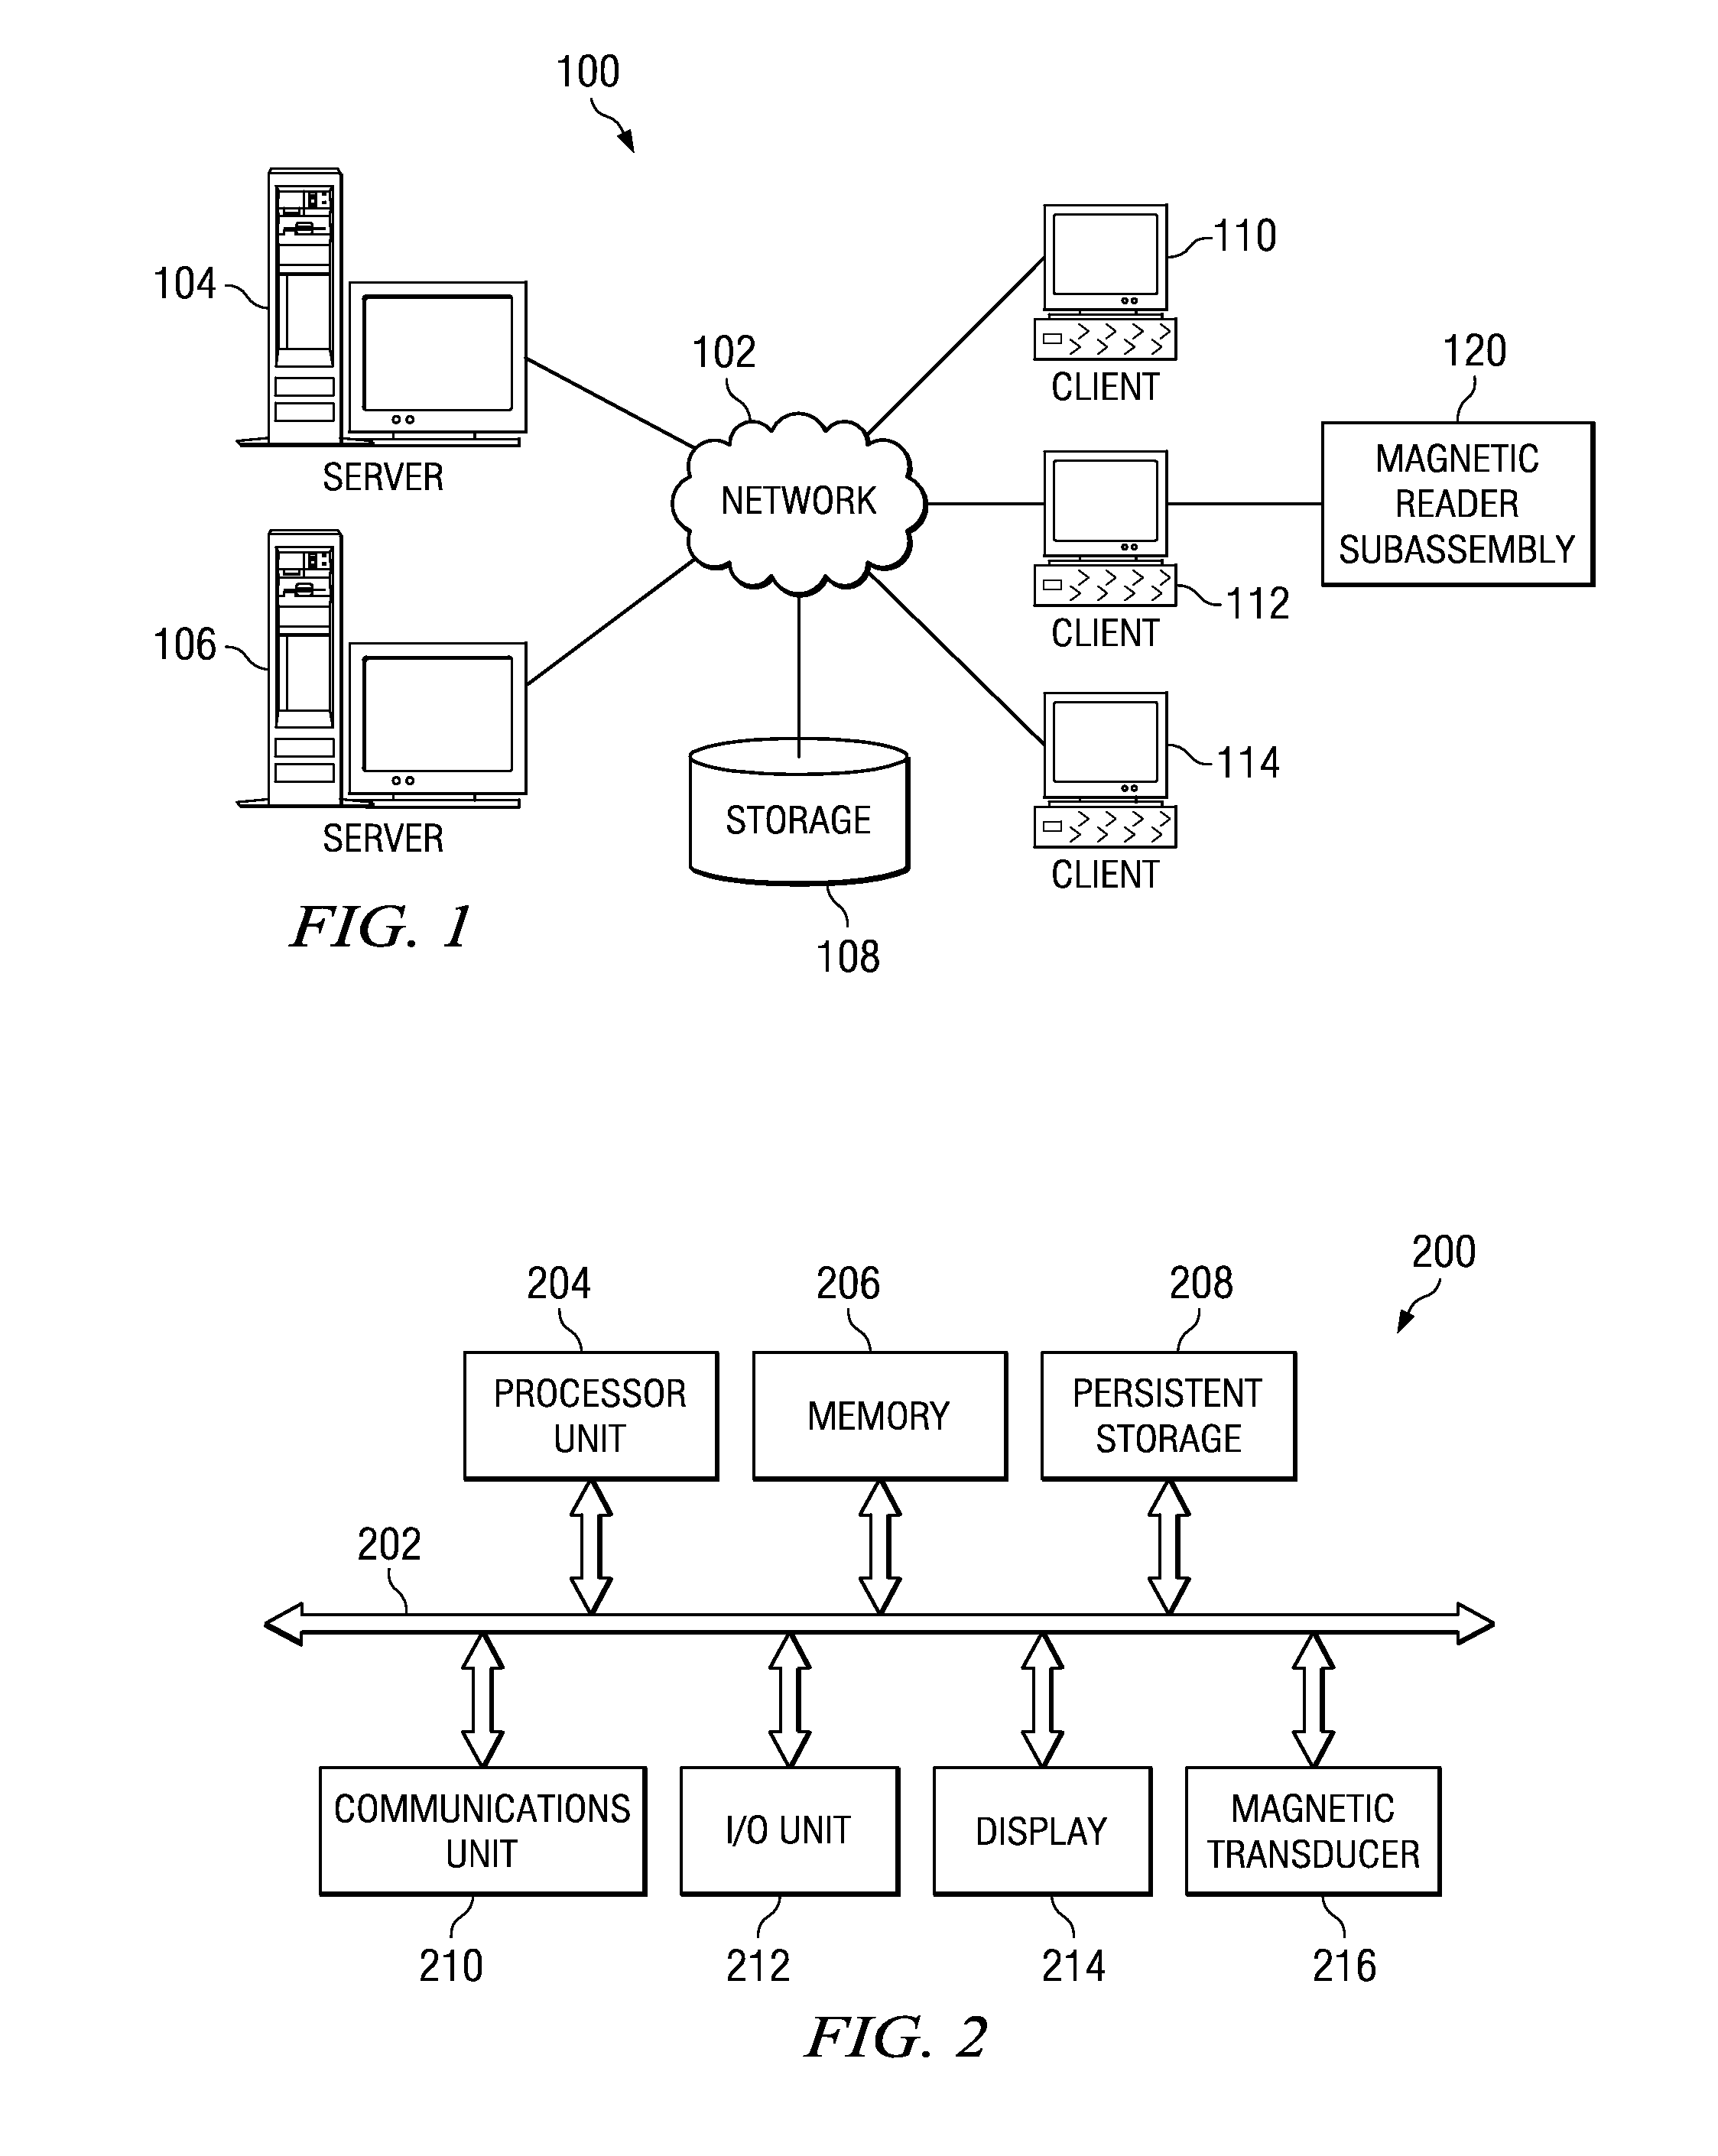 Method and system for diagnosing a magnetic reader